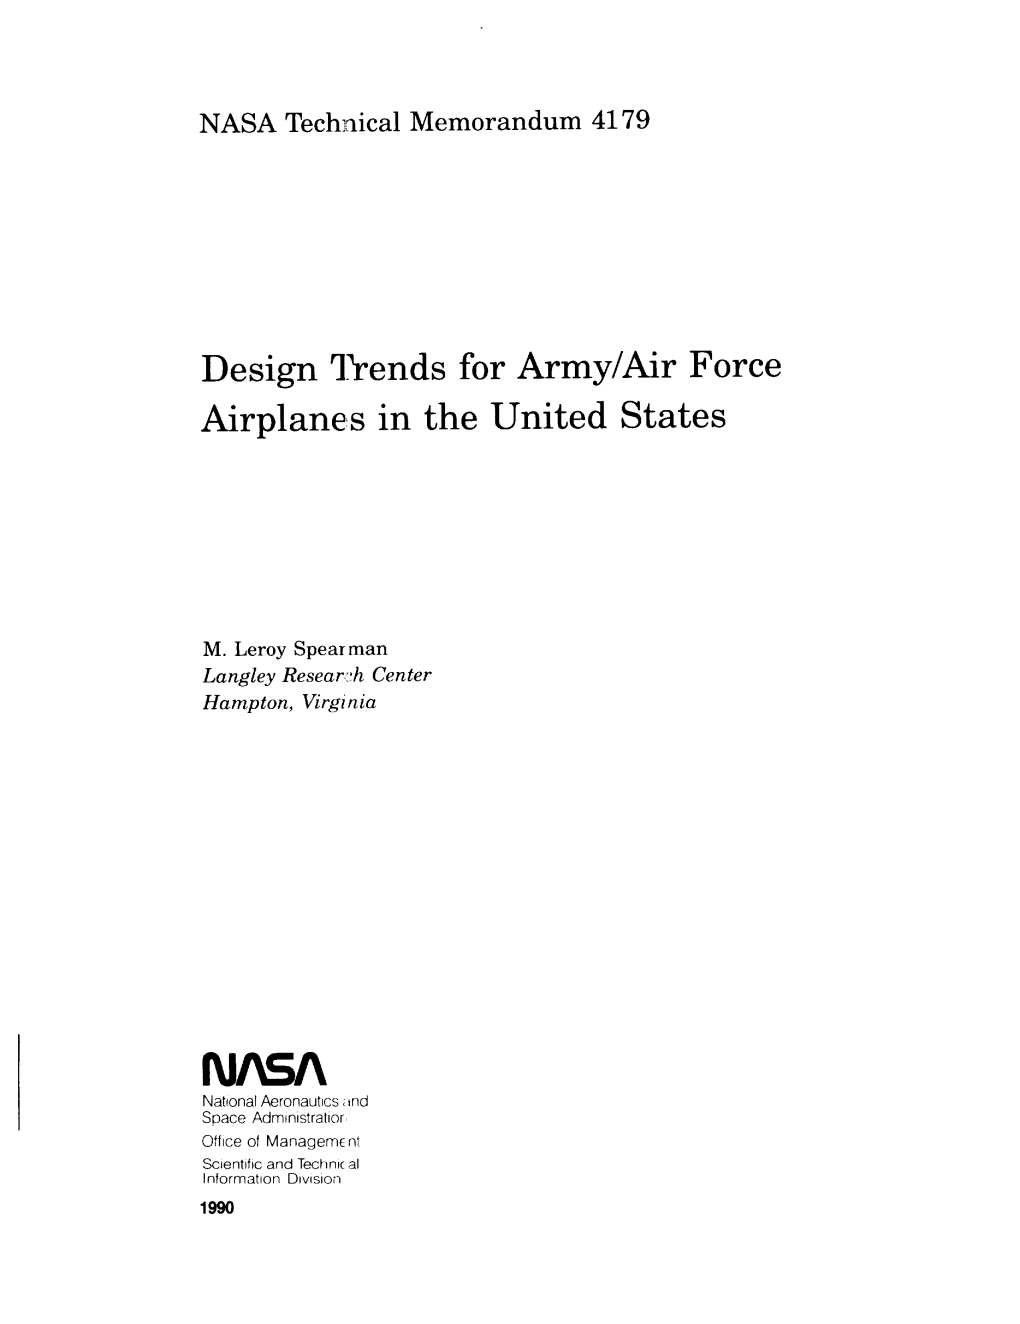 Design L Ends for Army/Air Force Airplanes in the United States